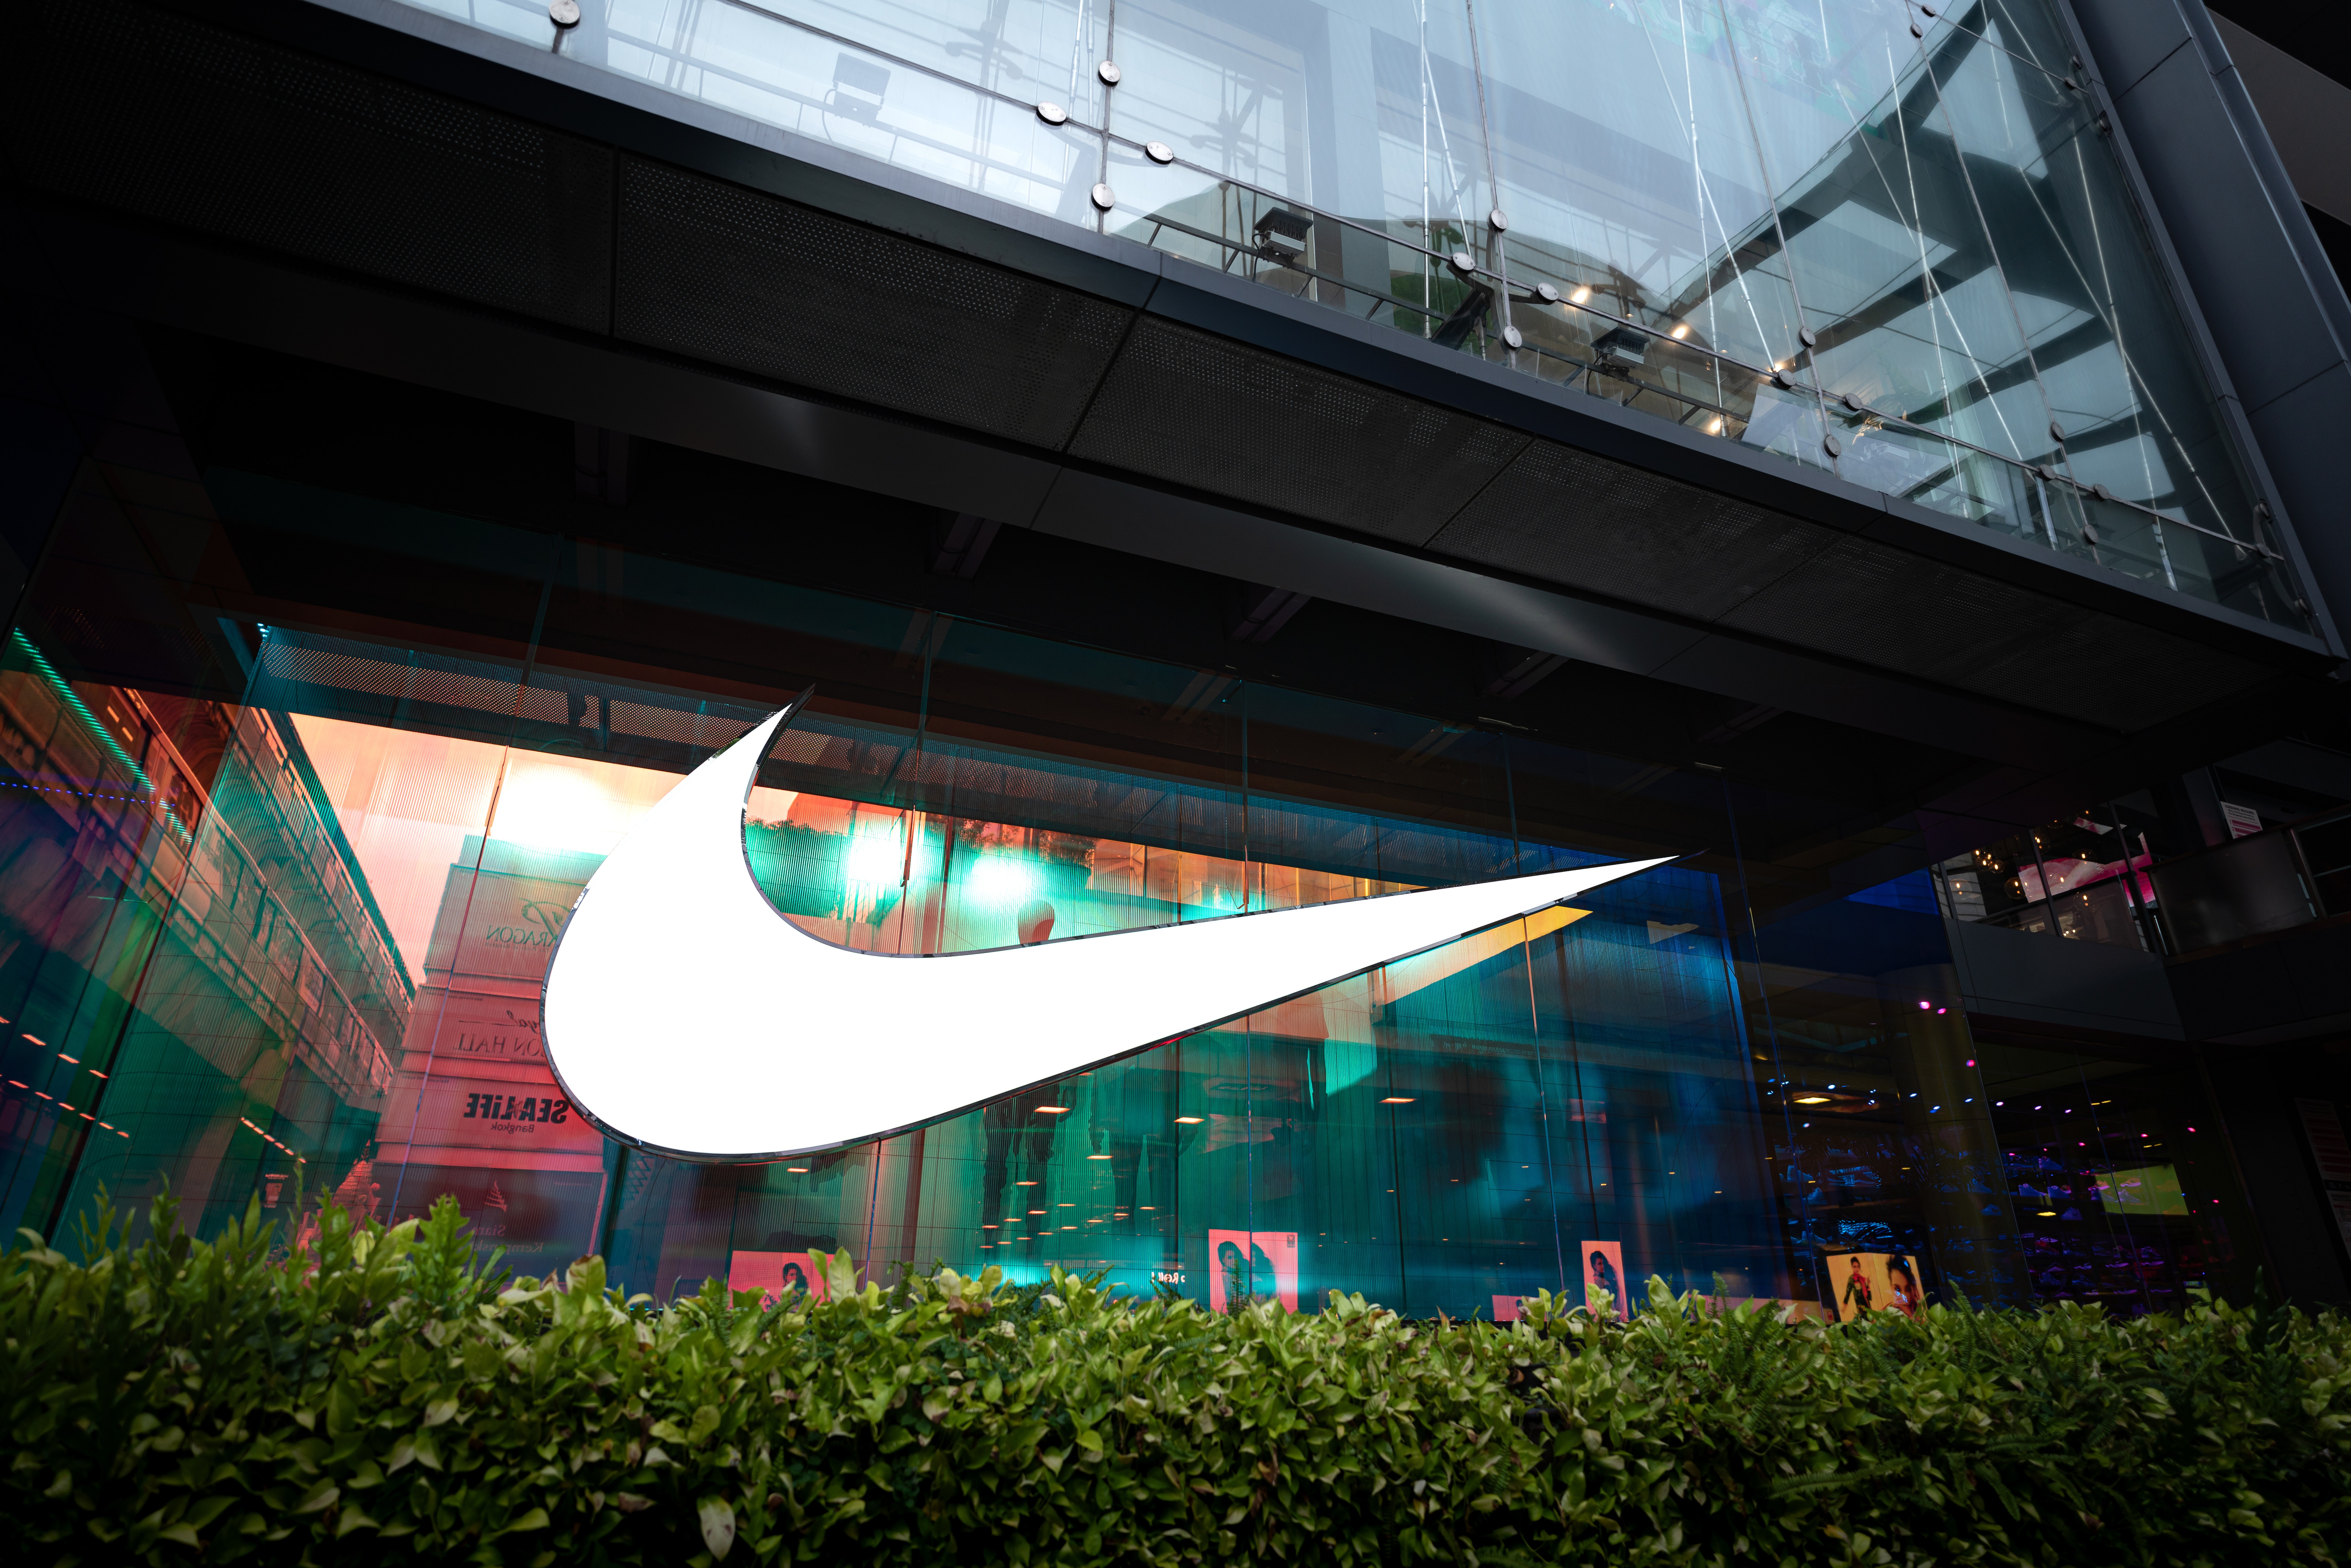 Nike Stock Is Down 40% This Year Despite Strong Performance: What Will Today's Earnings Call Reveal?